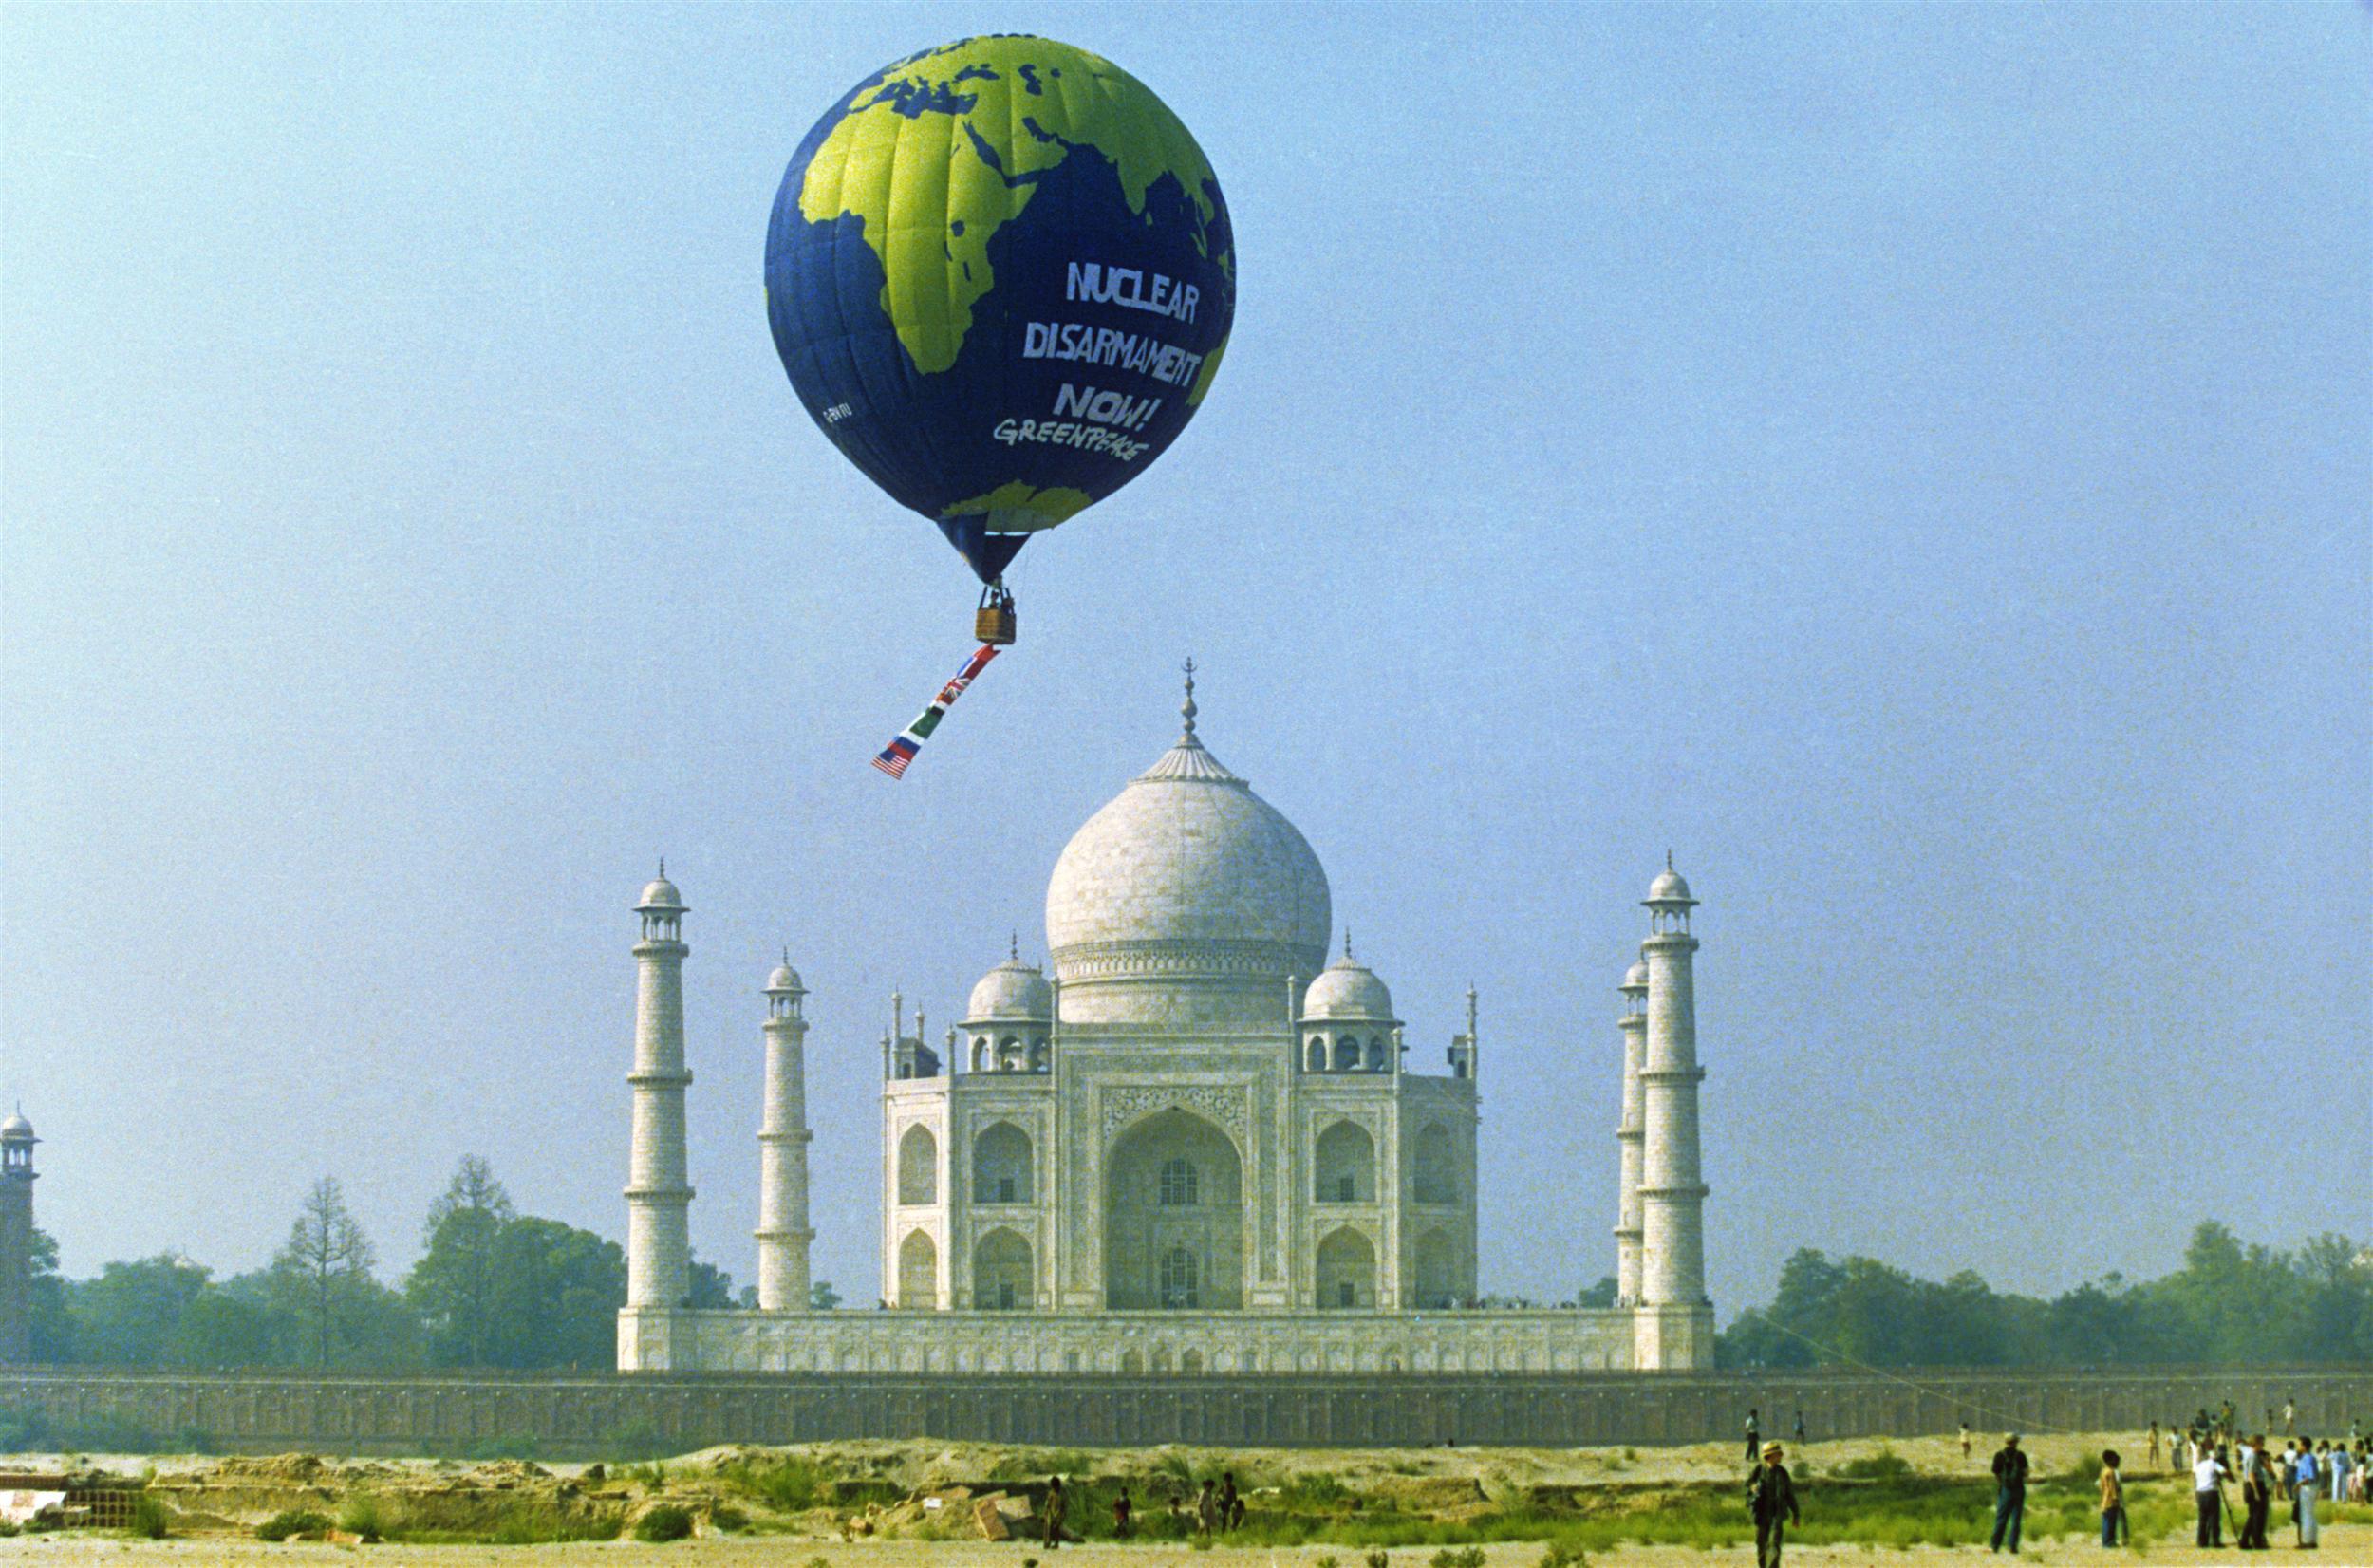 The Greenpeace hot air balloon with the slogan ‘Nuclear Disarmament Now!’ flies above the famous Taj Mahal in a protest against nuclear testing in India.